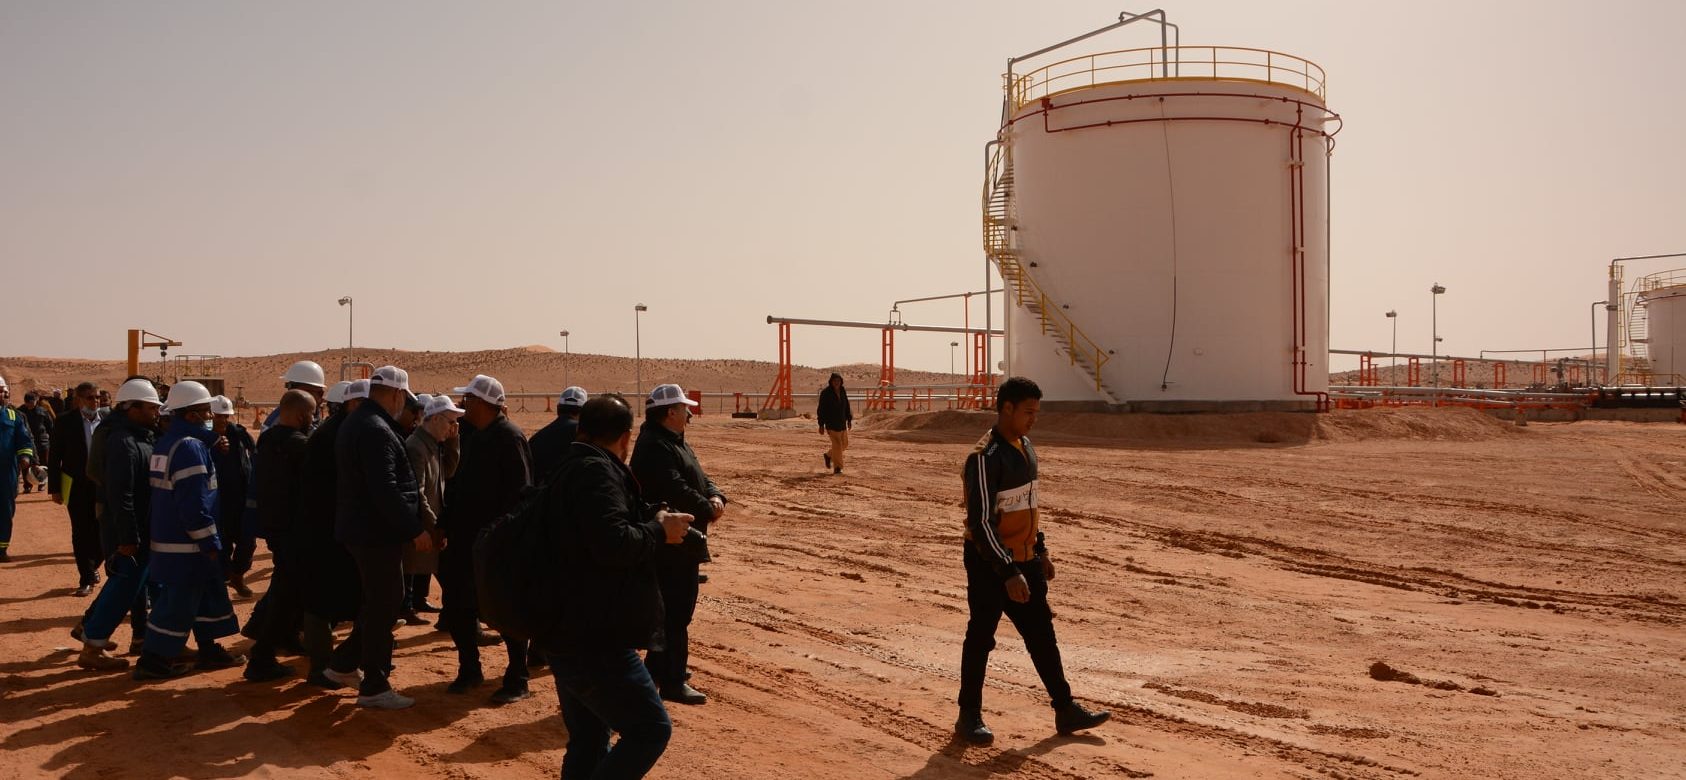 Libya has announced that it has started production of 14,000 barrels per day of oil from the Tahara field in the Hamada basin